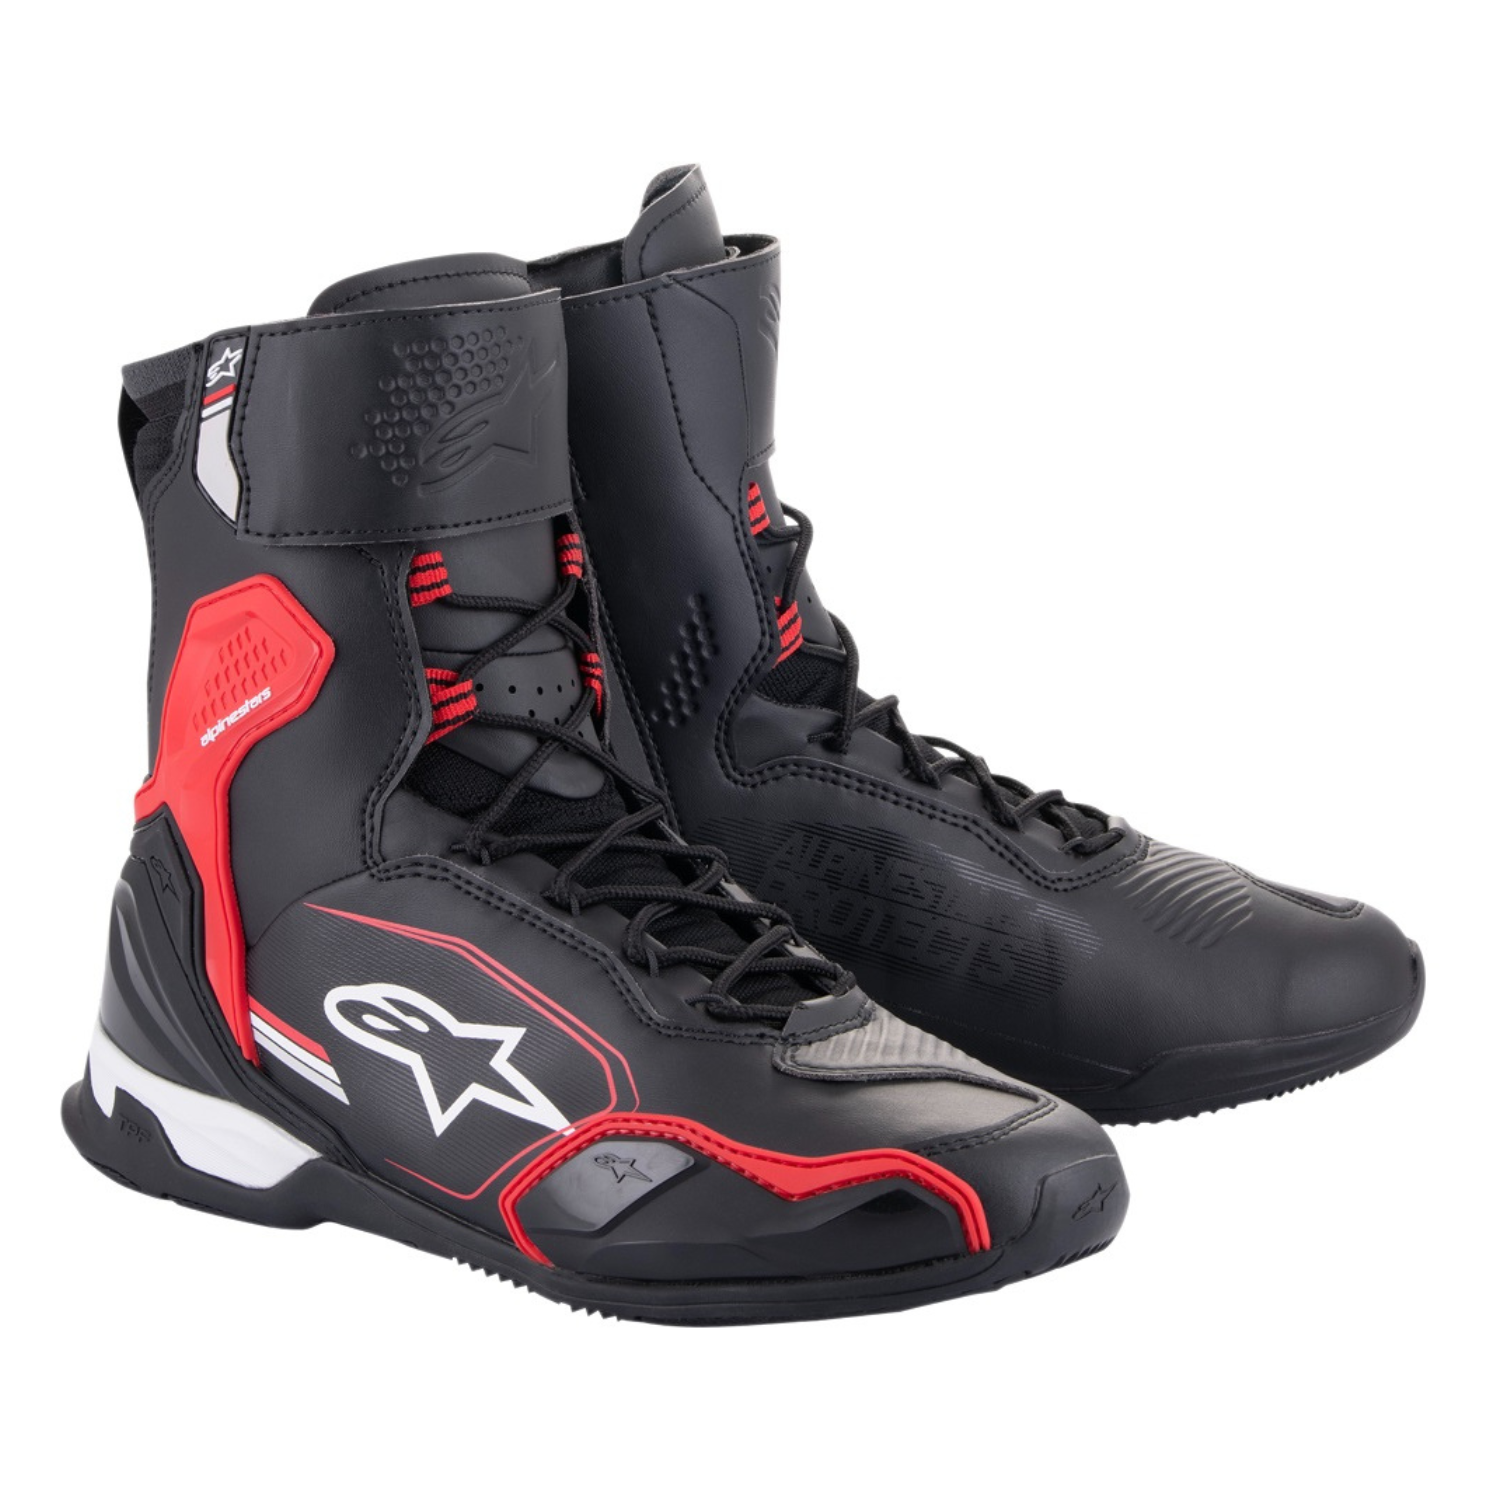 Image of Alpinestars Superfaster Shoes Black Bright Red White Talla US 11